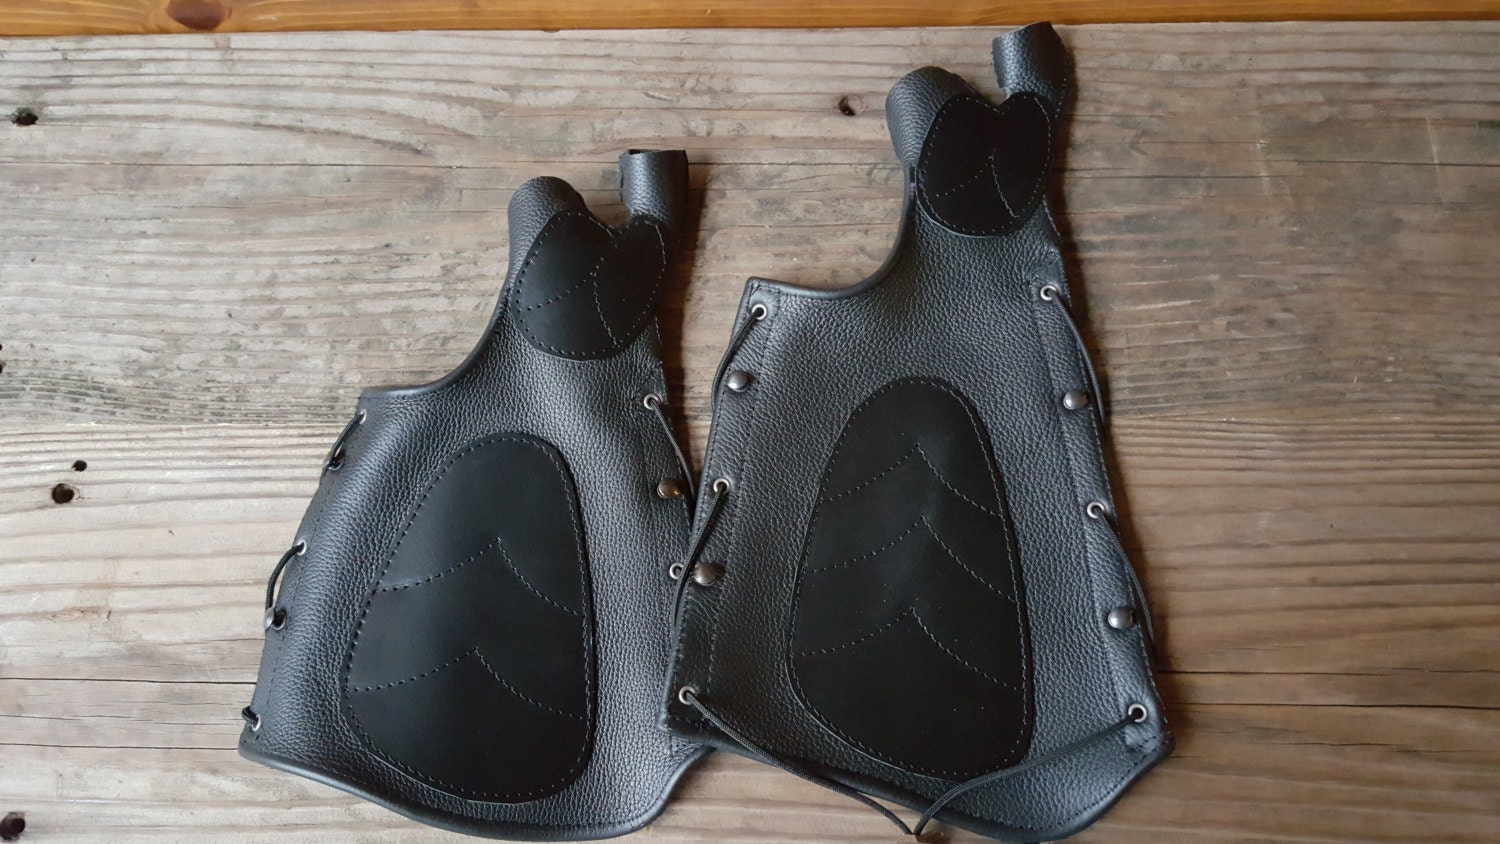 XL Black Leather Arm Guard Bow Hand Shooting Glove Right | Etsy